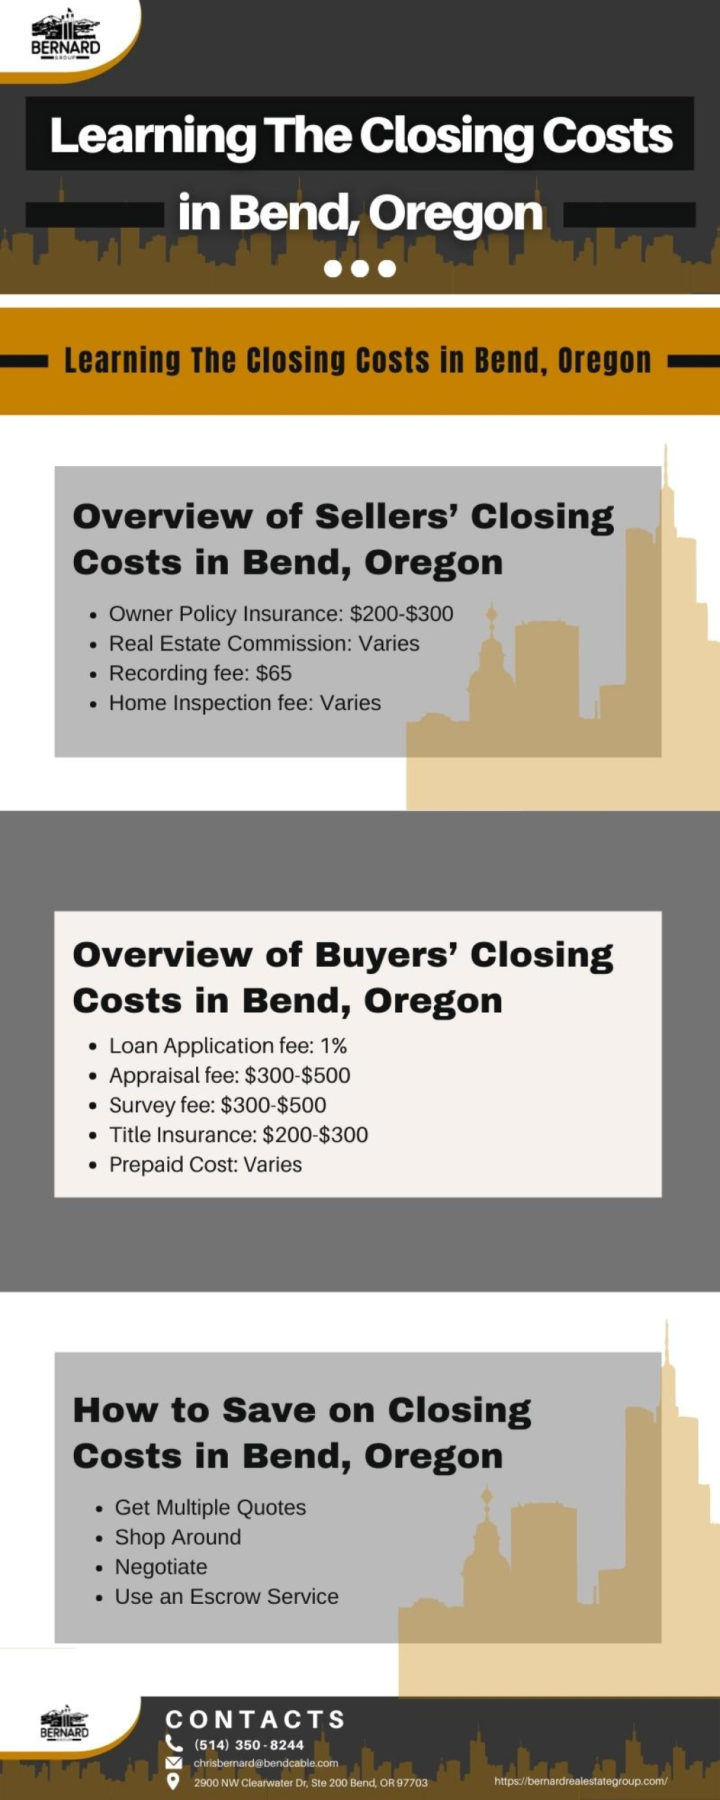 Learning The Closing Costs in Bend, Oregon